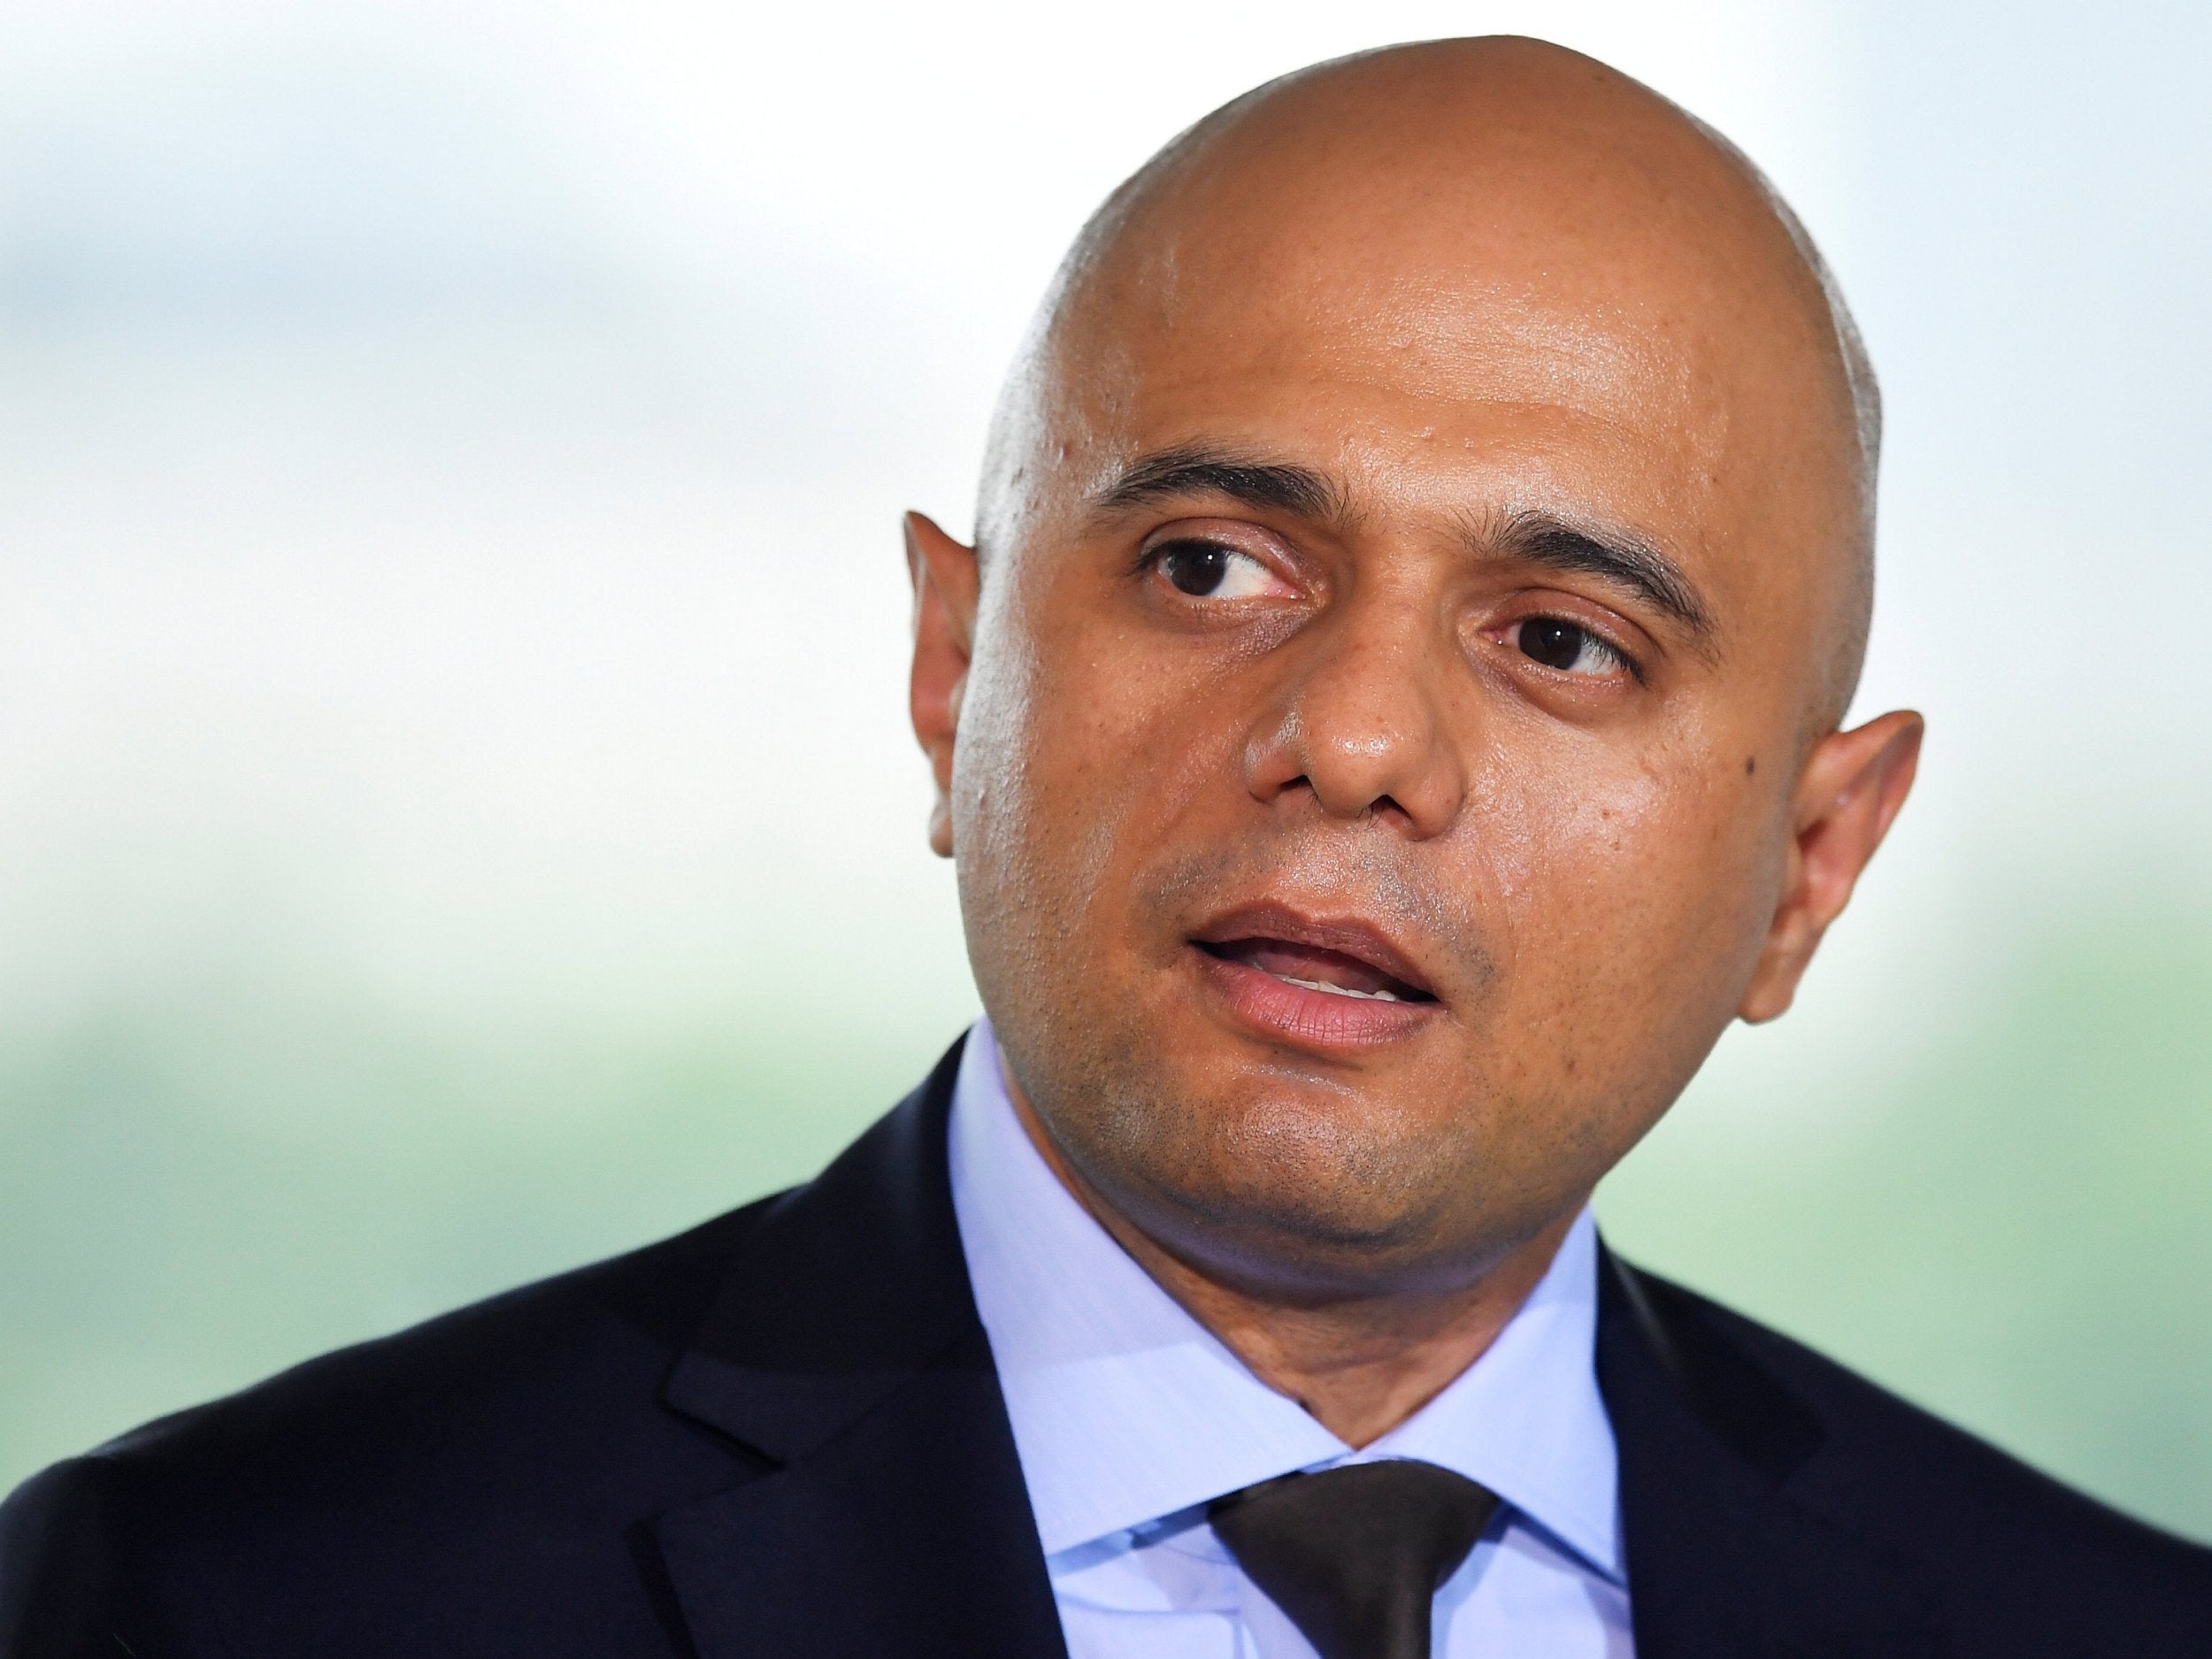 If Javid imagines his racial and religious origins offer any defence to the charge of incendiary race-baiting, he must be out of his tiny mind